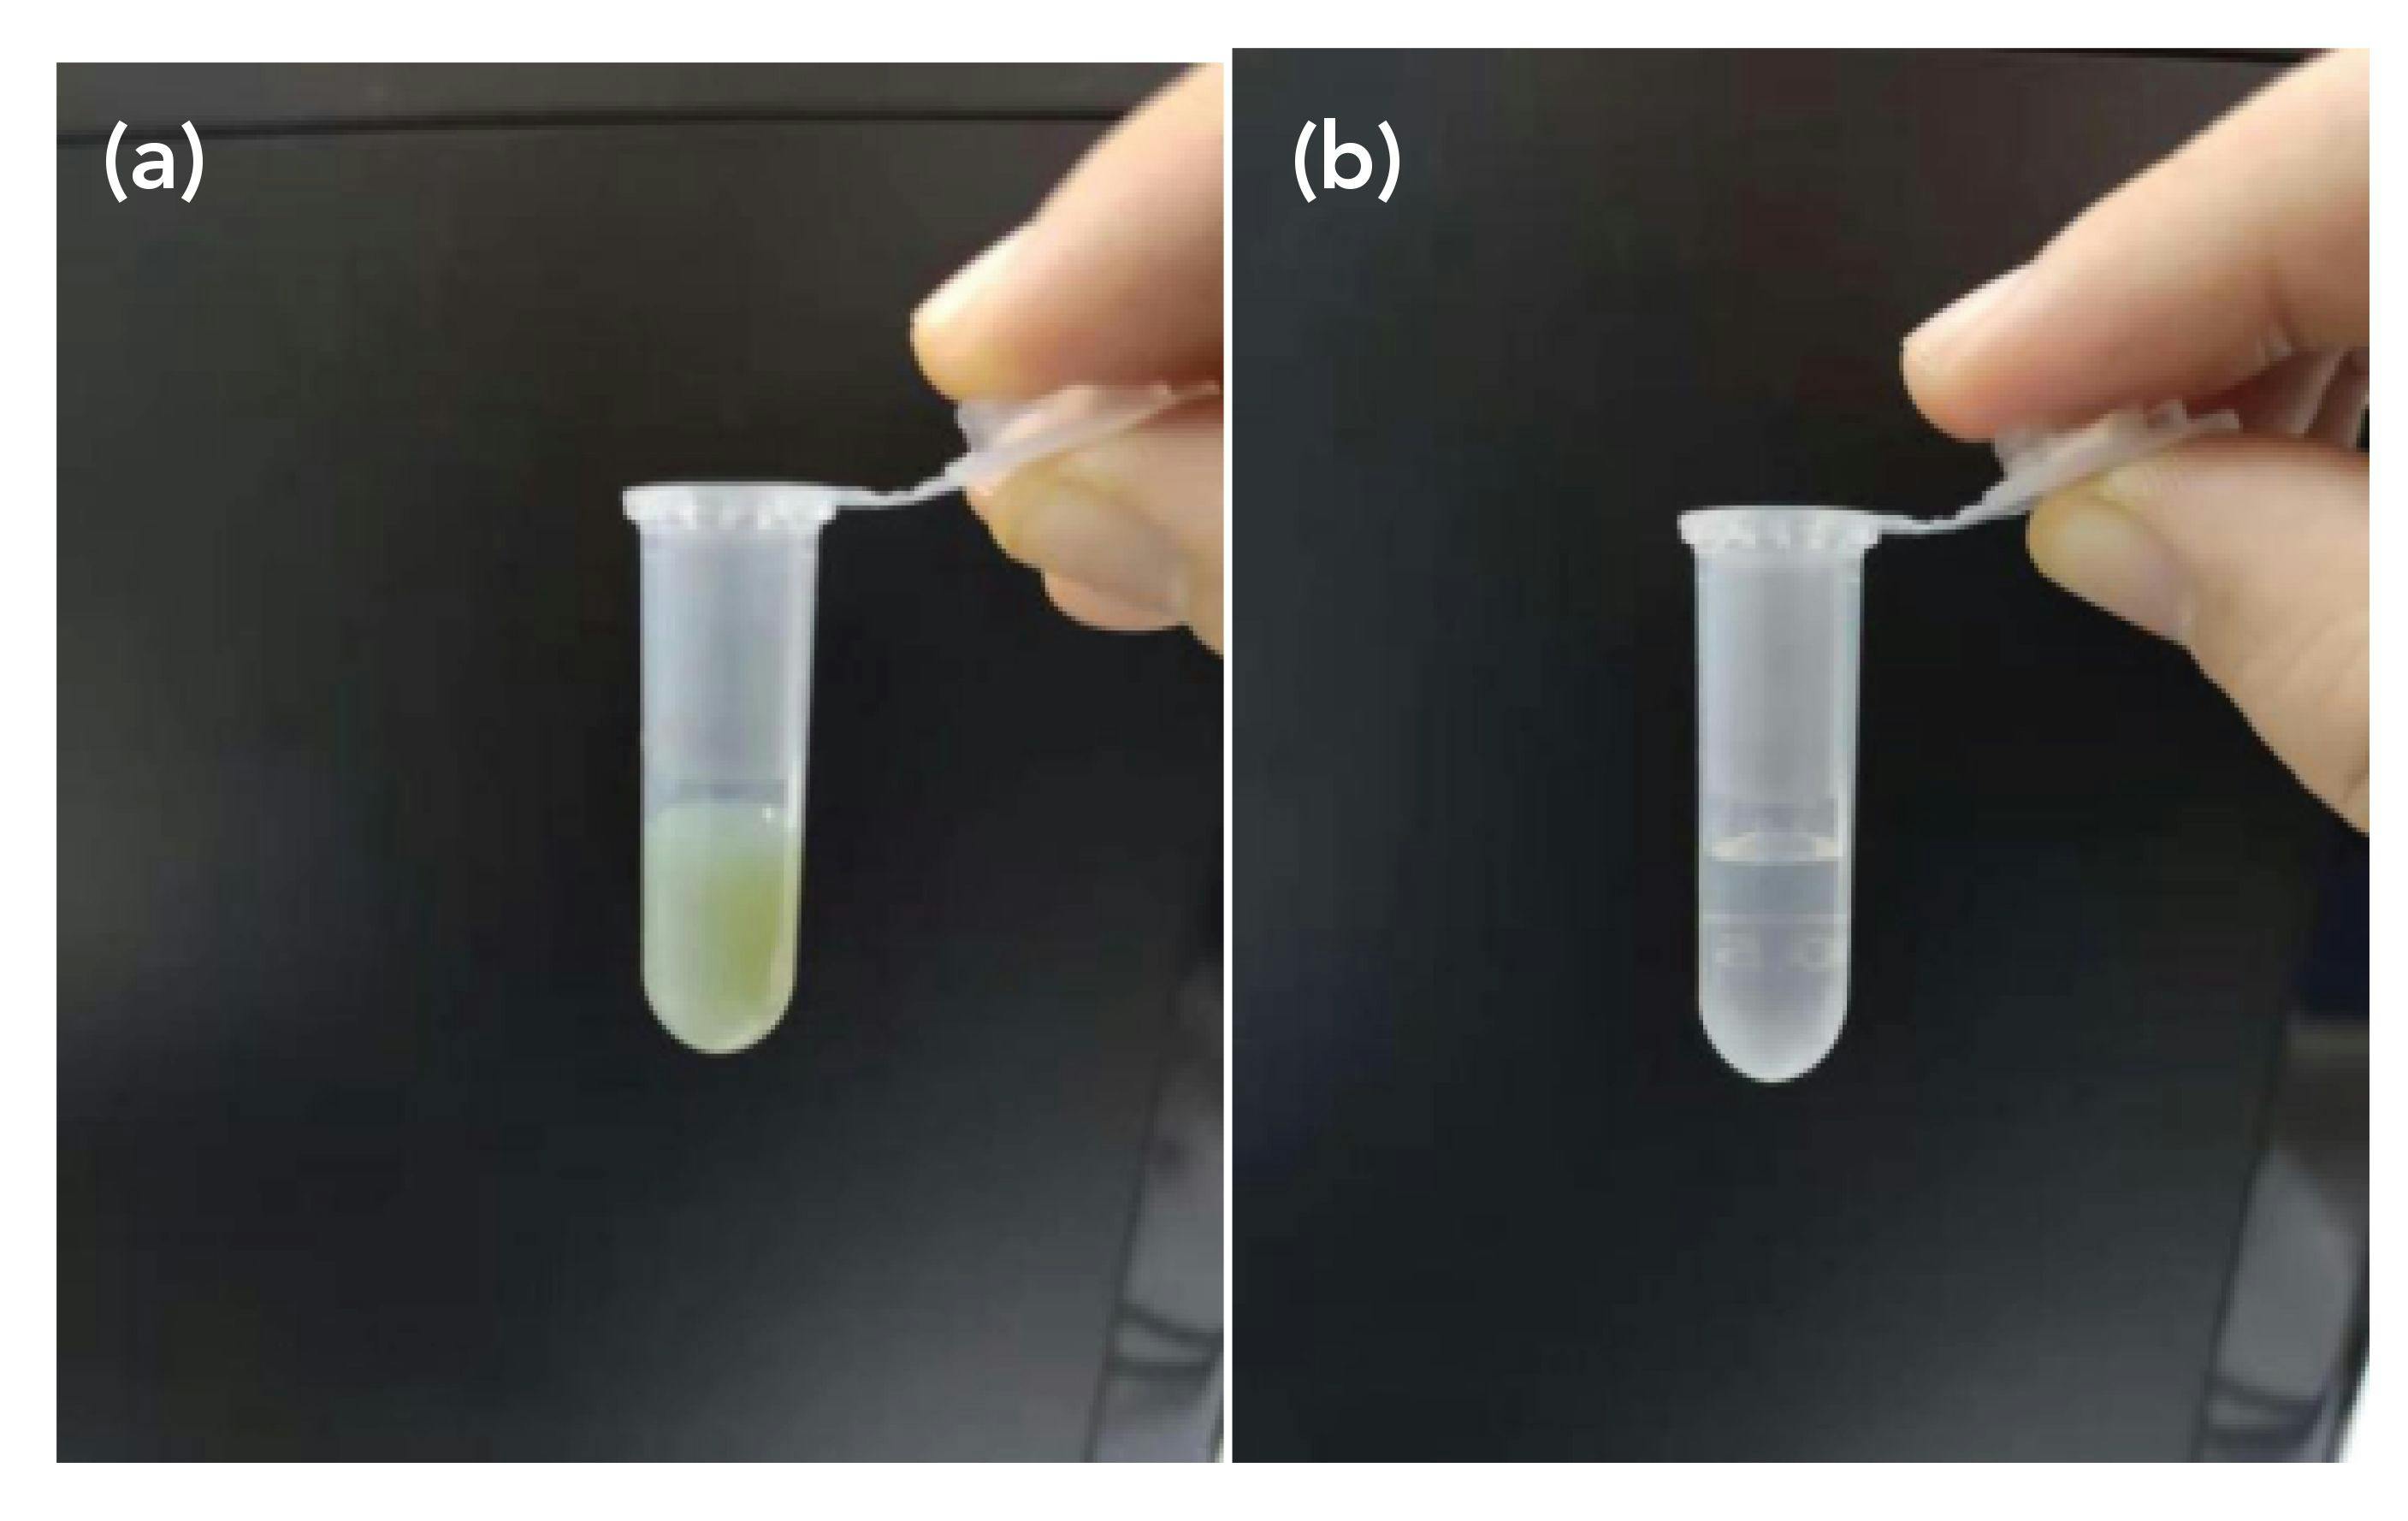 FIGURE 8: (a) Silver sol before centrifugation, and (b) silver sol after centrifugation.